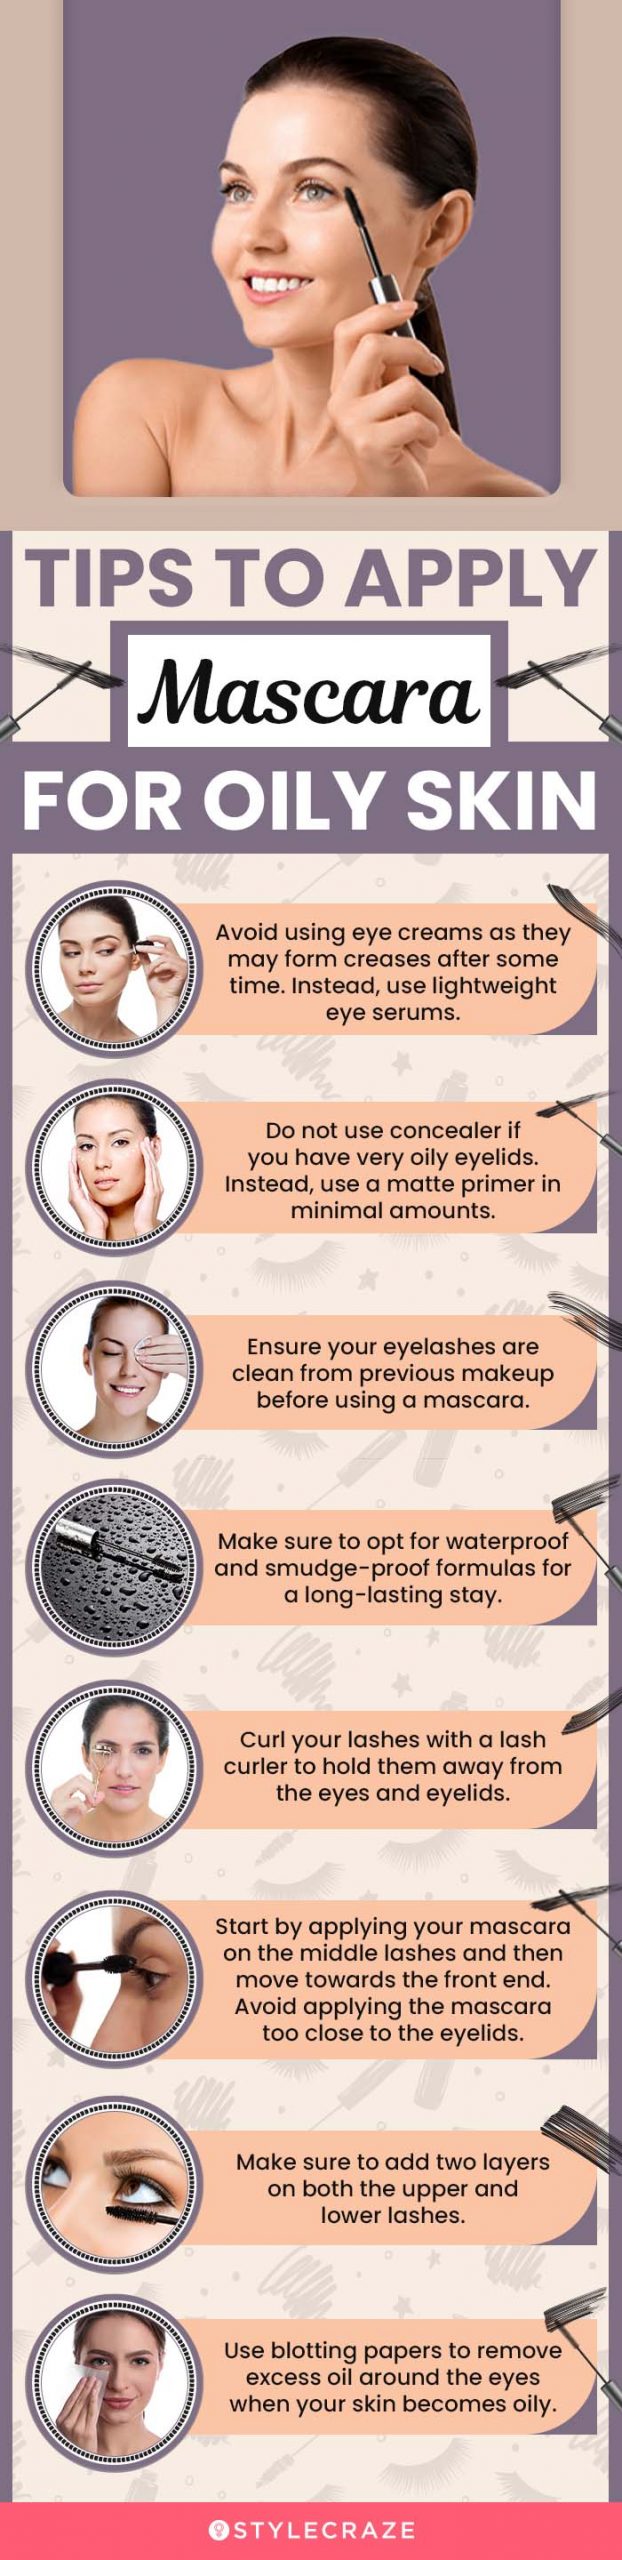 Tips To Wear Mascara The Best Way For Oily Skin (infographic)